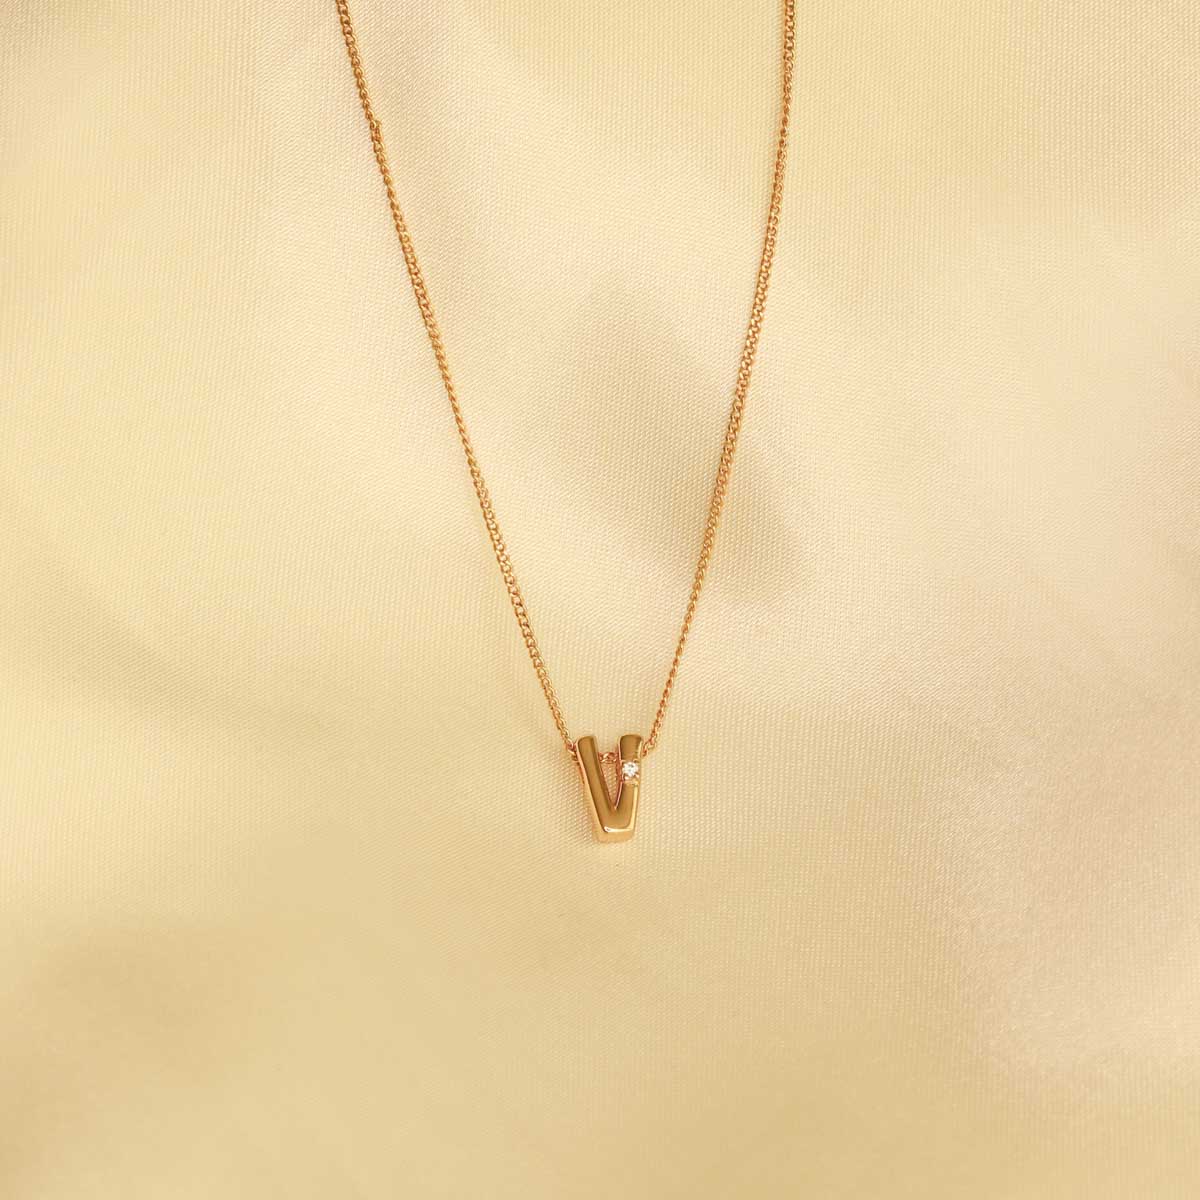 Flat lay shot of V Initial Pendant Necklace in Gold